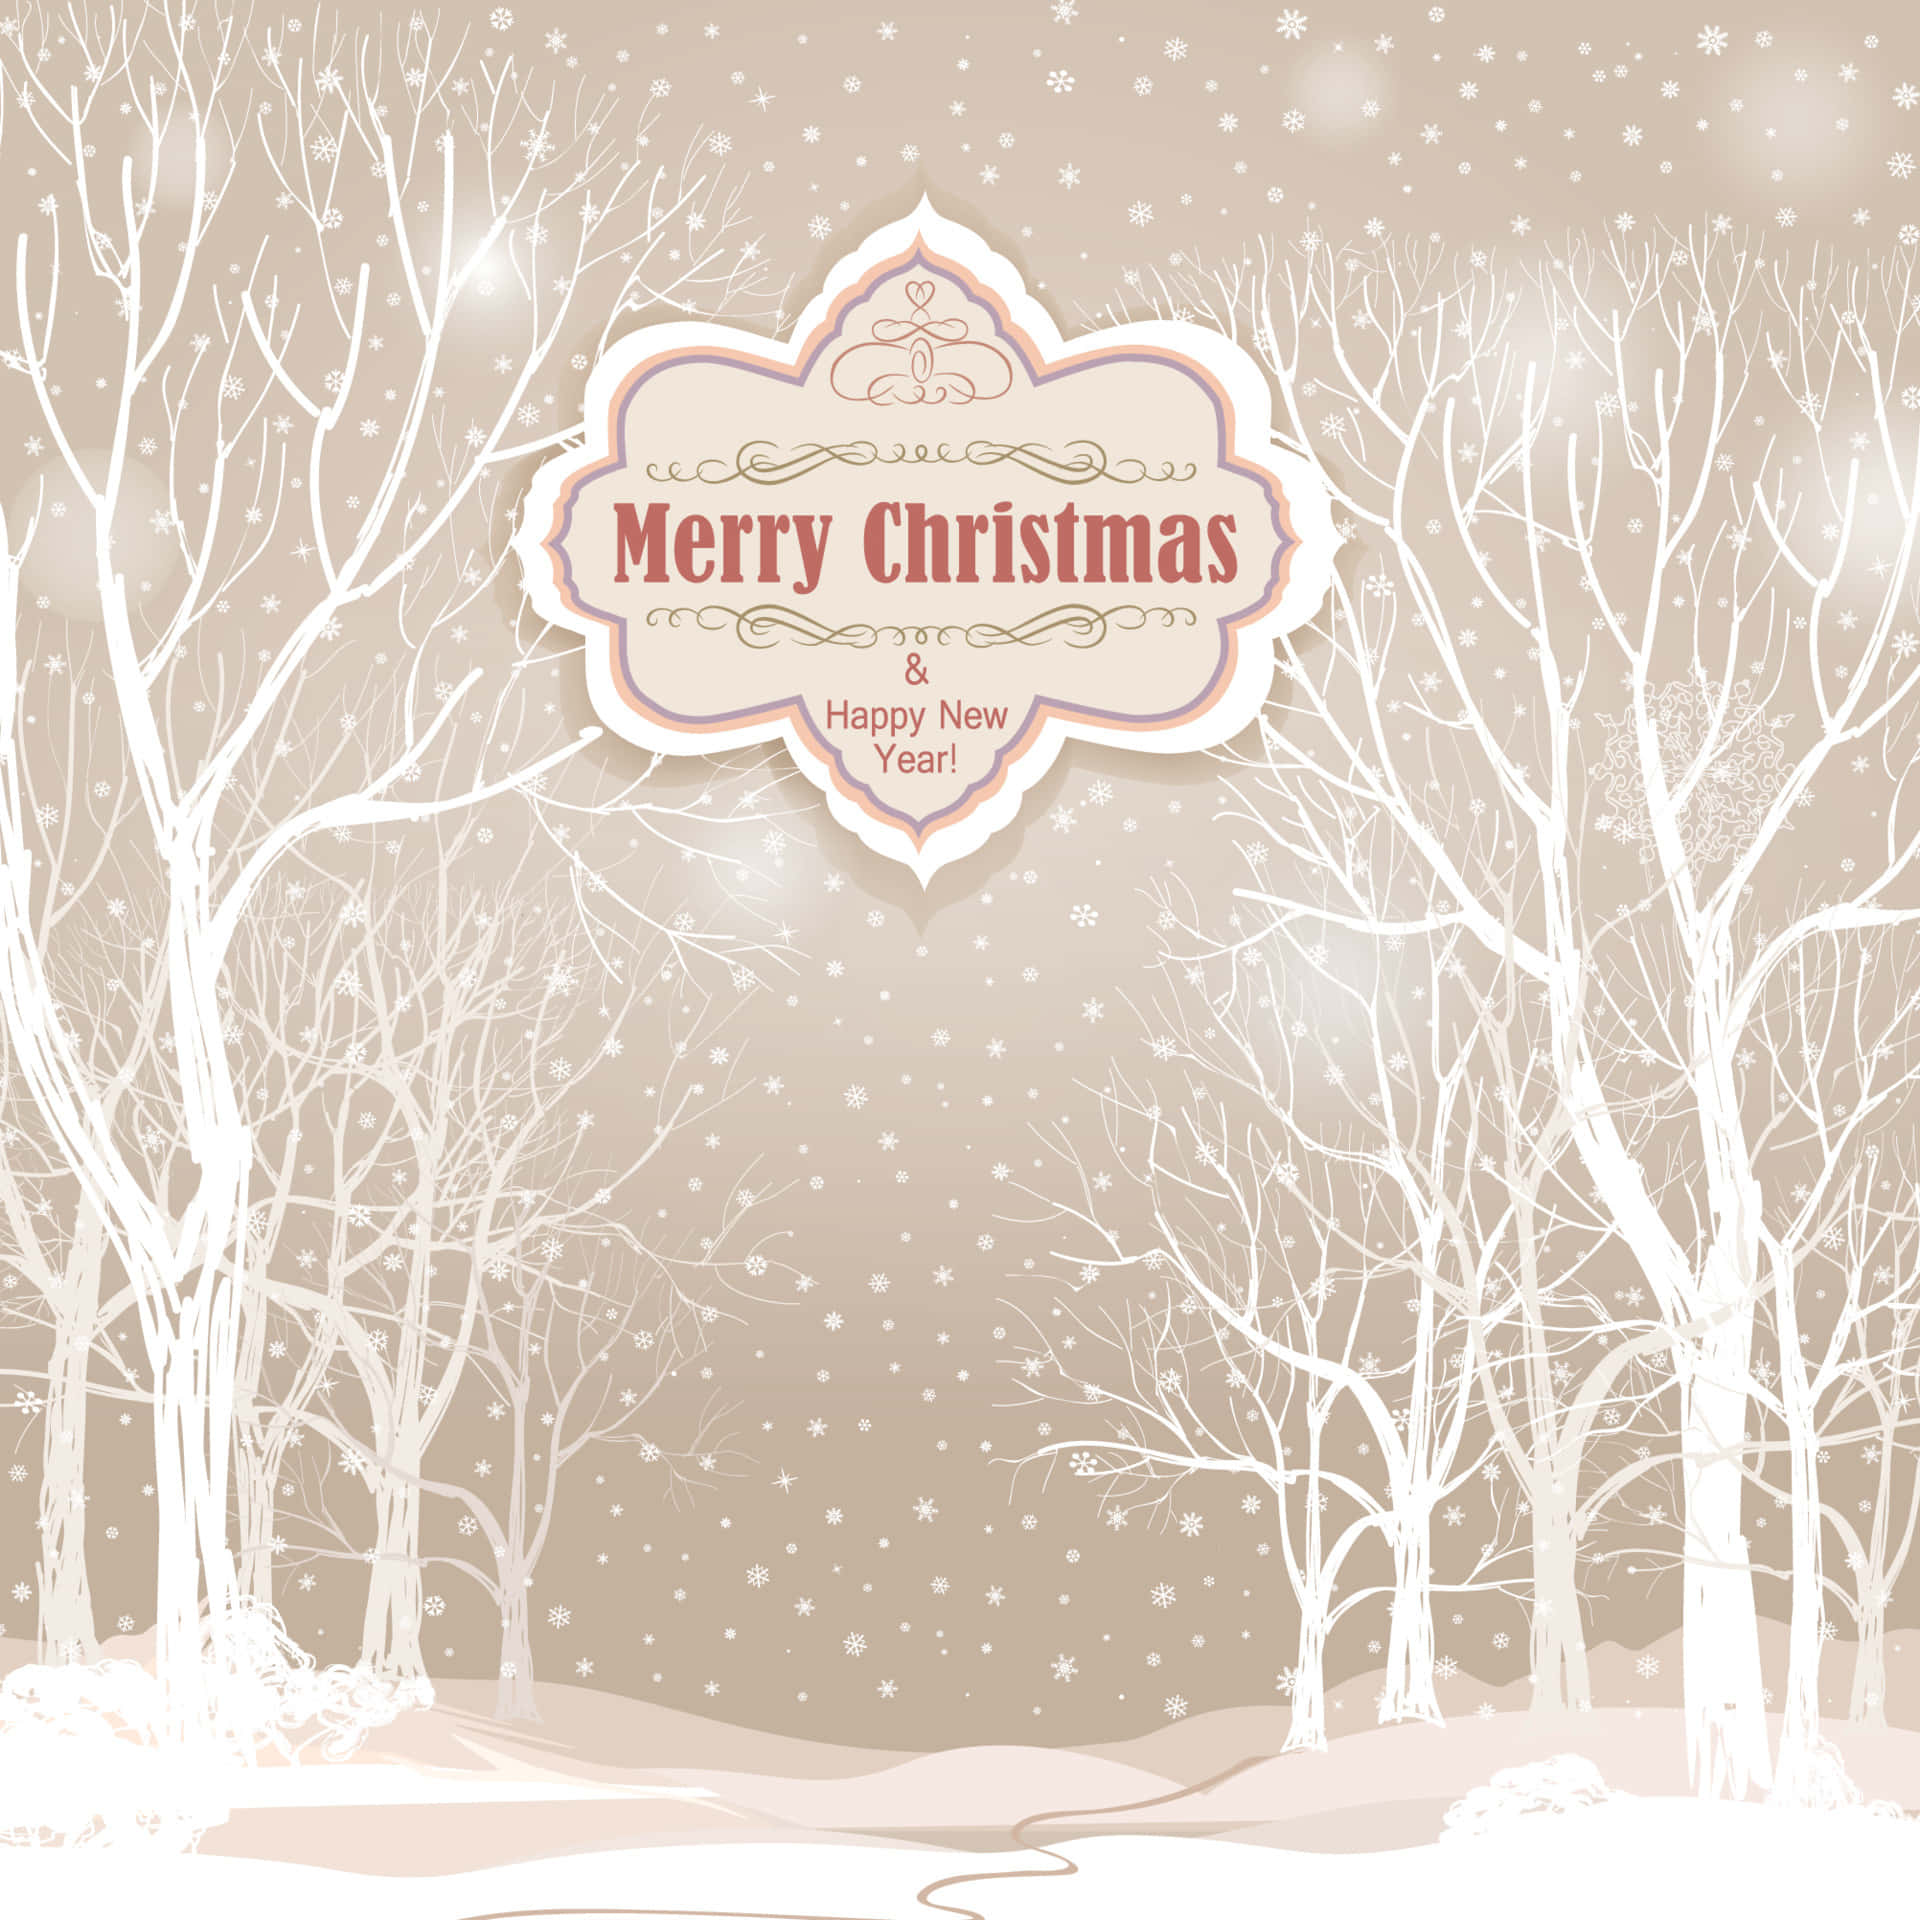 "Celebrate the Holidays with Vintage Christmas Decor" Wallpaper